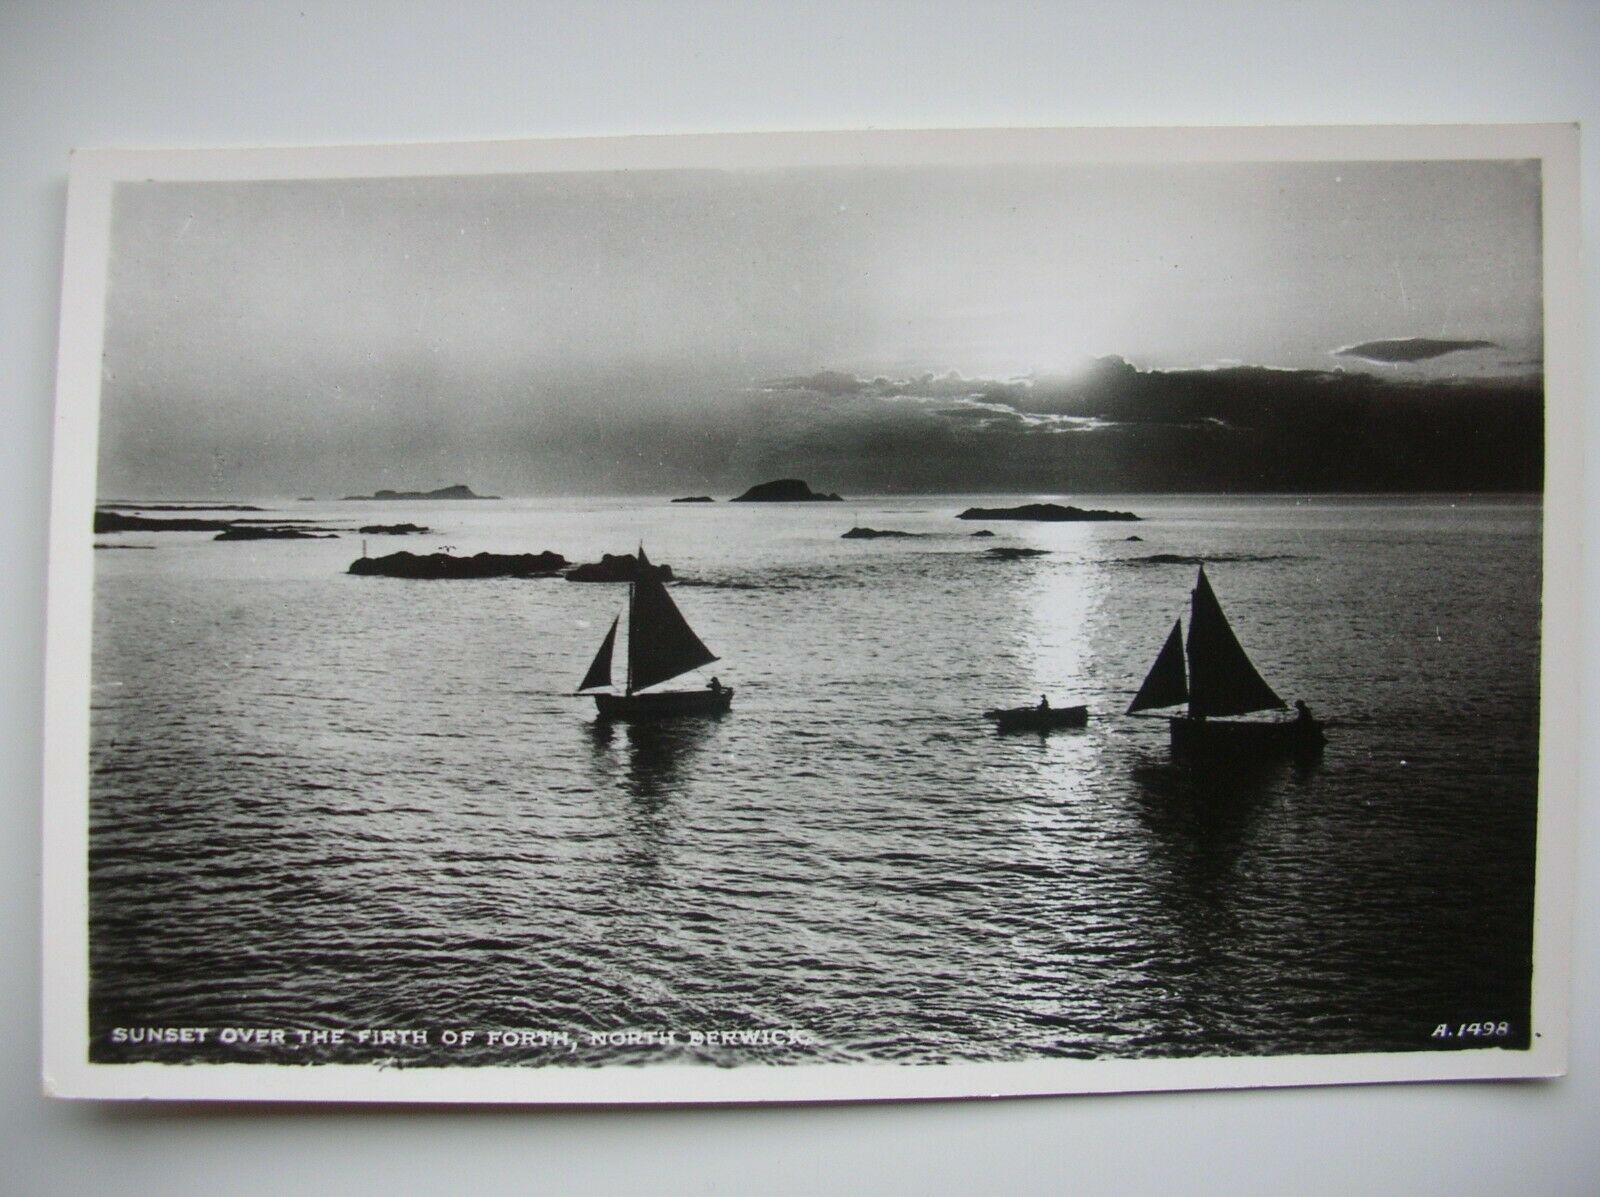 House Clearance - North Berwick – Sunset over the Firth of Forth - Yachts. (J B White Ltd)